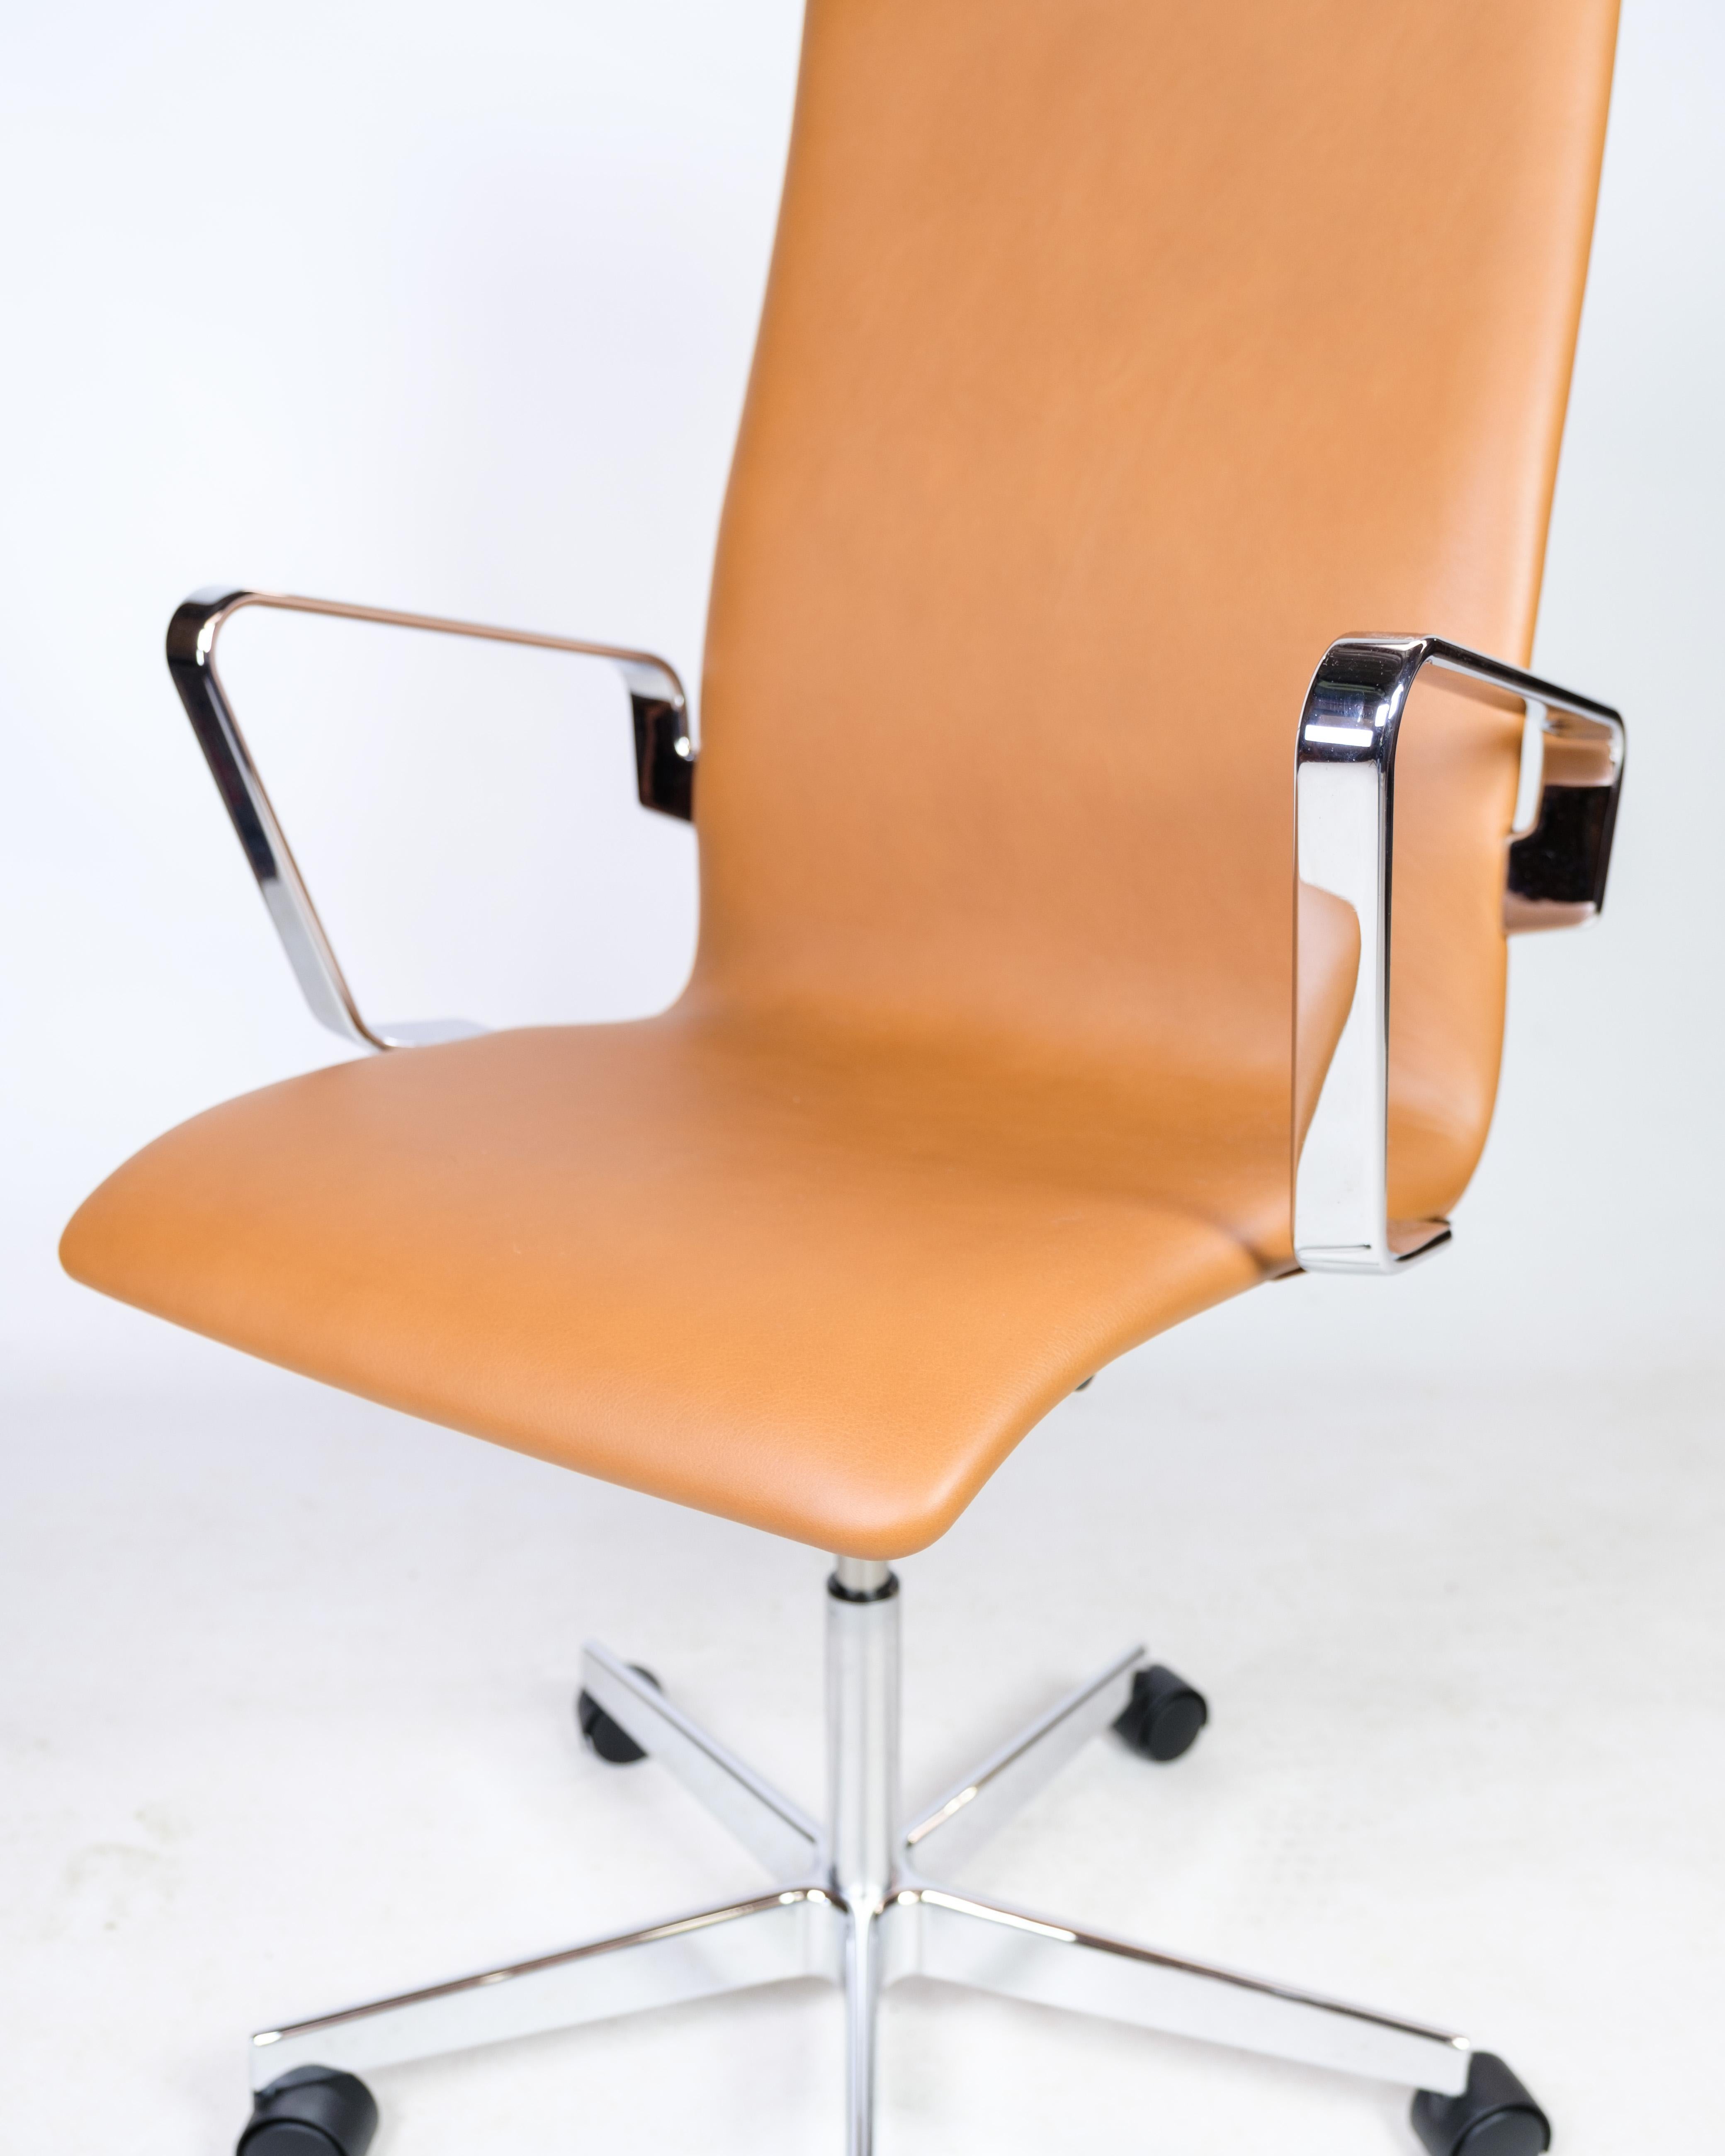 Oxford Classic Office Chair, Model 3293C, Cognac Leather, Arne Jacobsen, 1963 For Sale 1